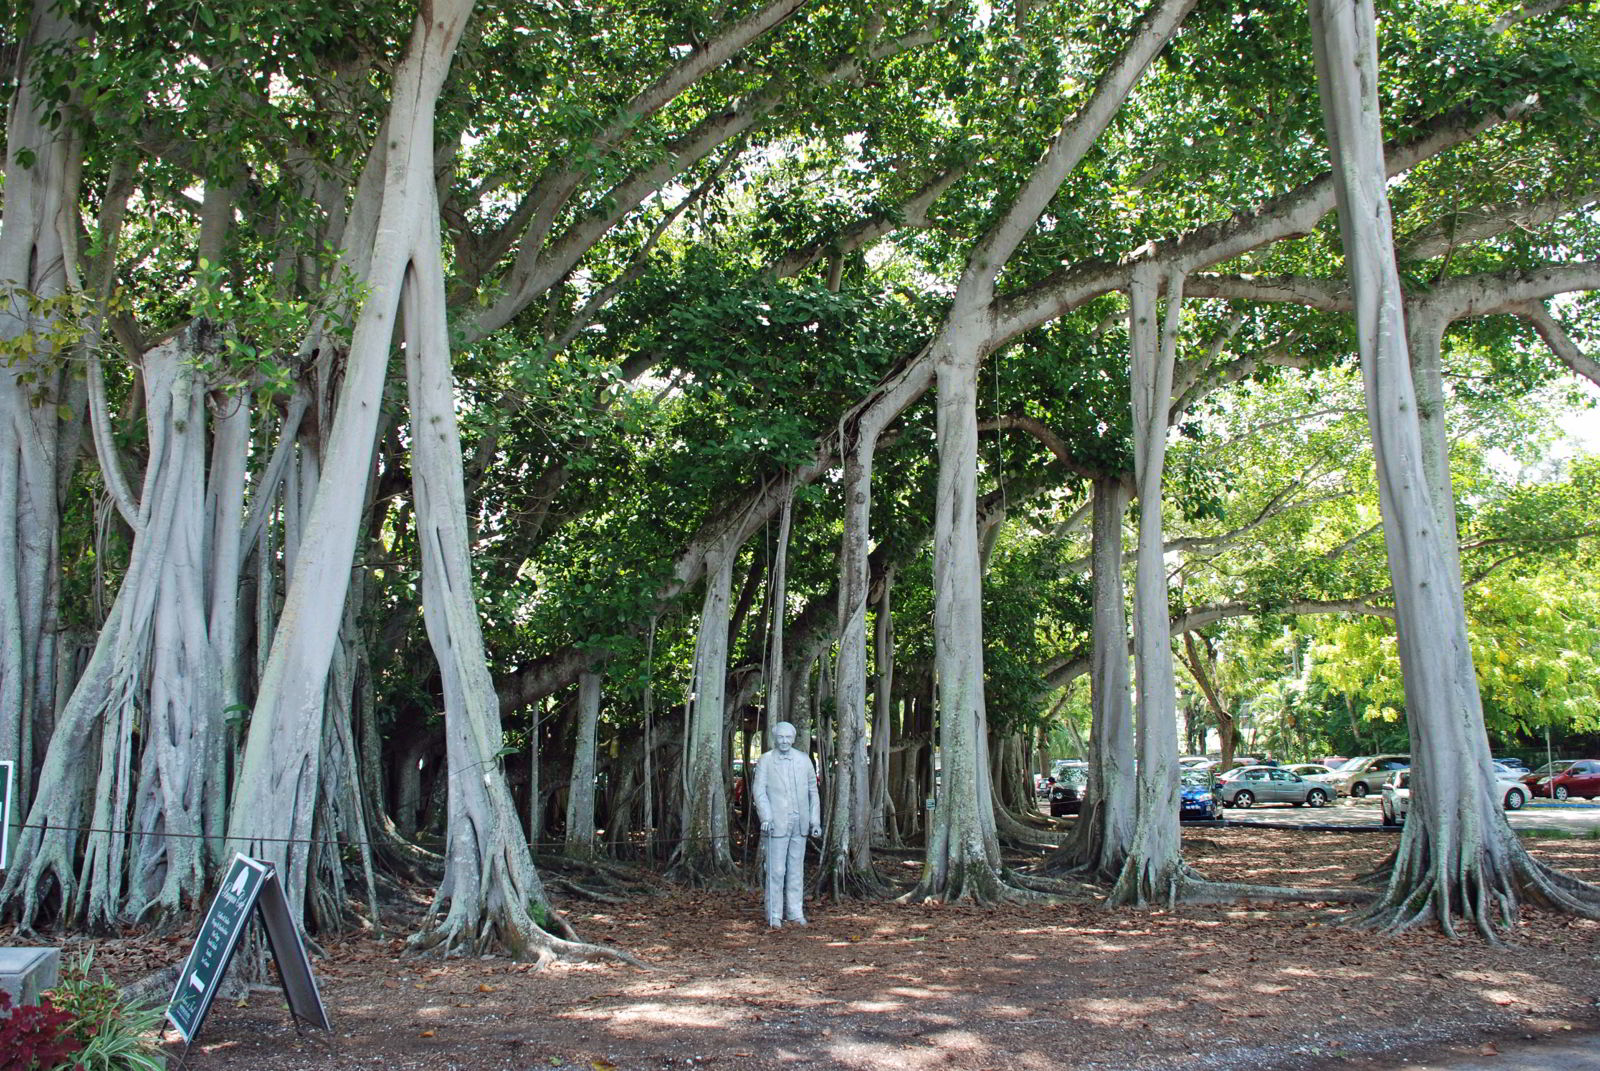 An image of the Banyon Tree on the Ford Edison Winter Estates in Fort Myers, Florida USA